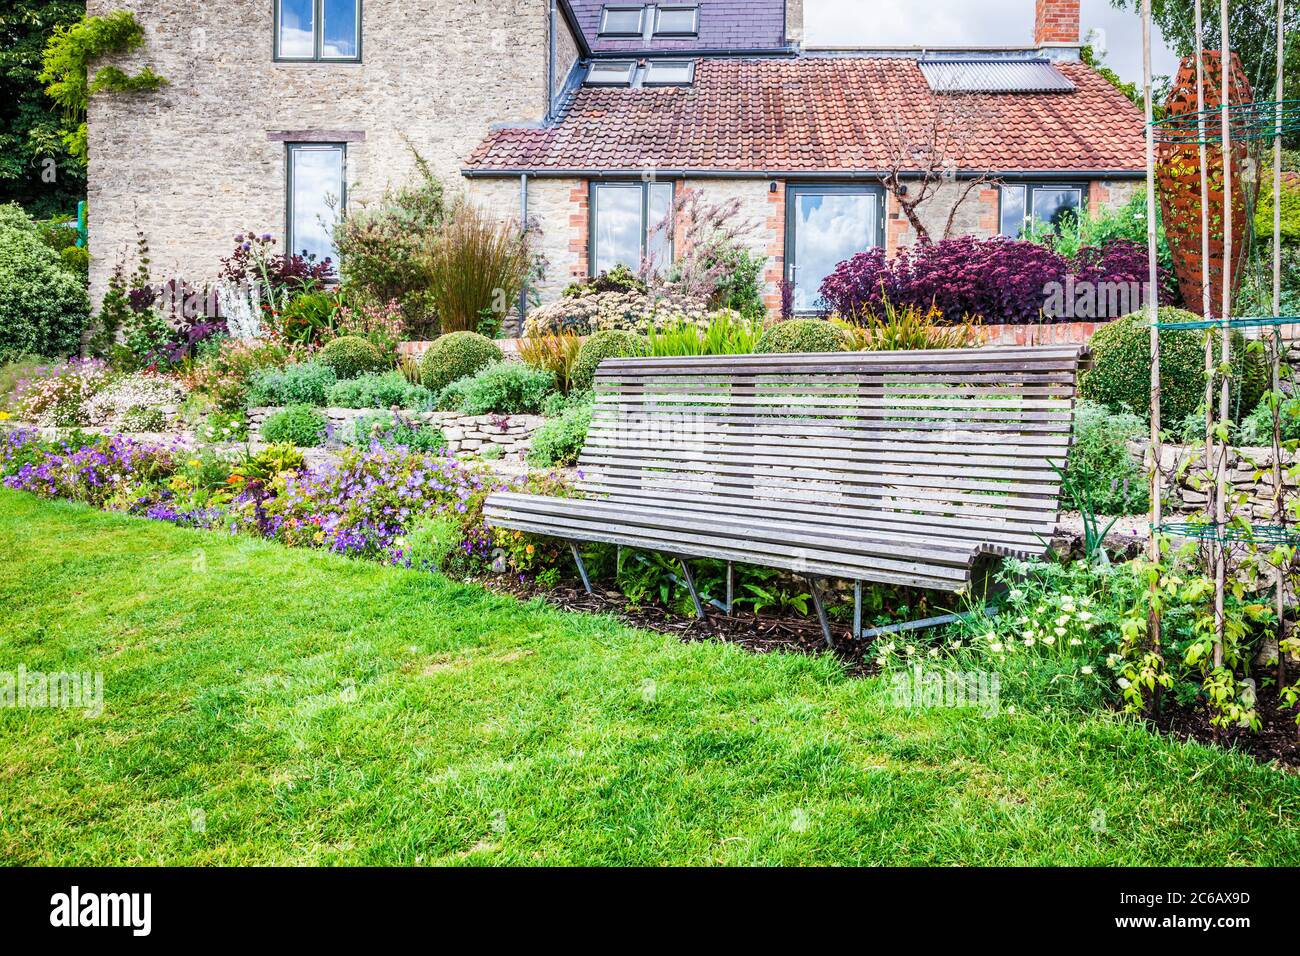 Terraced herbaceous borders in a country garden. Stock Photo